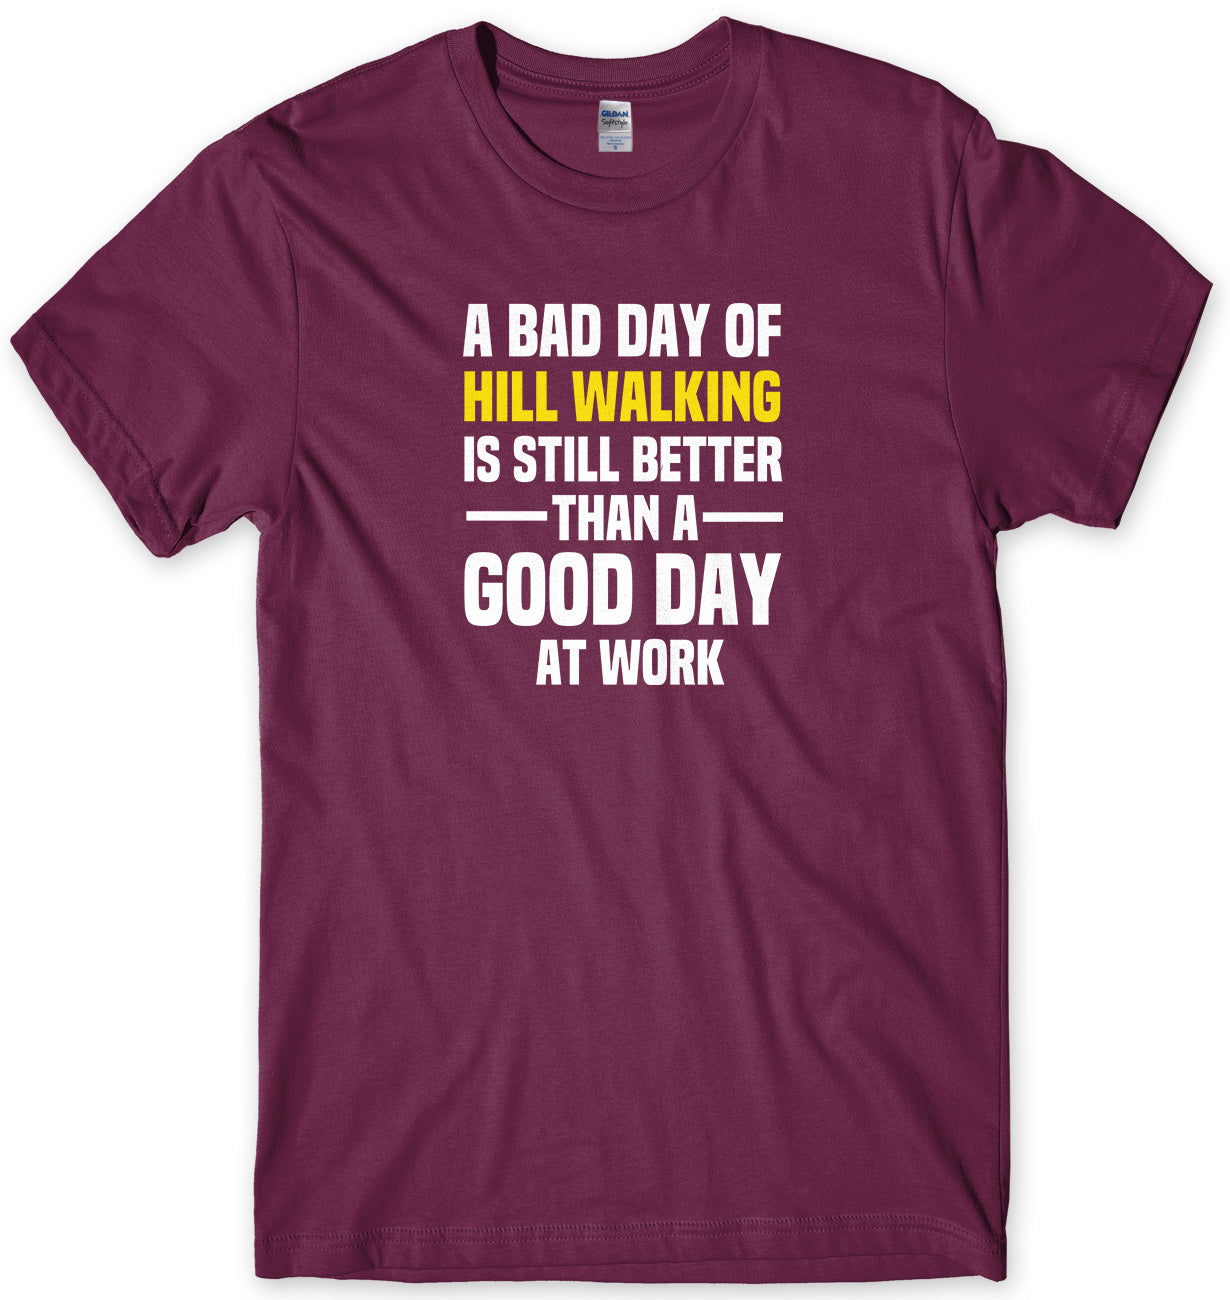 A BAD DAY OF HILL WALKING IS STILL BETTER THAN A GOOD DAY AT WORK MENS FUNNY SLOGAN UNISEX T-SHIRT - StreetSide Surgeons